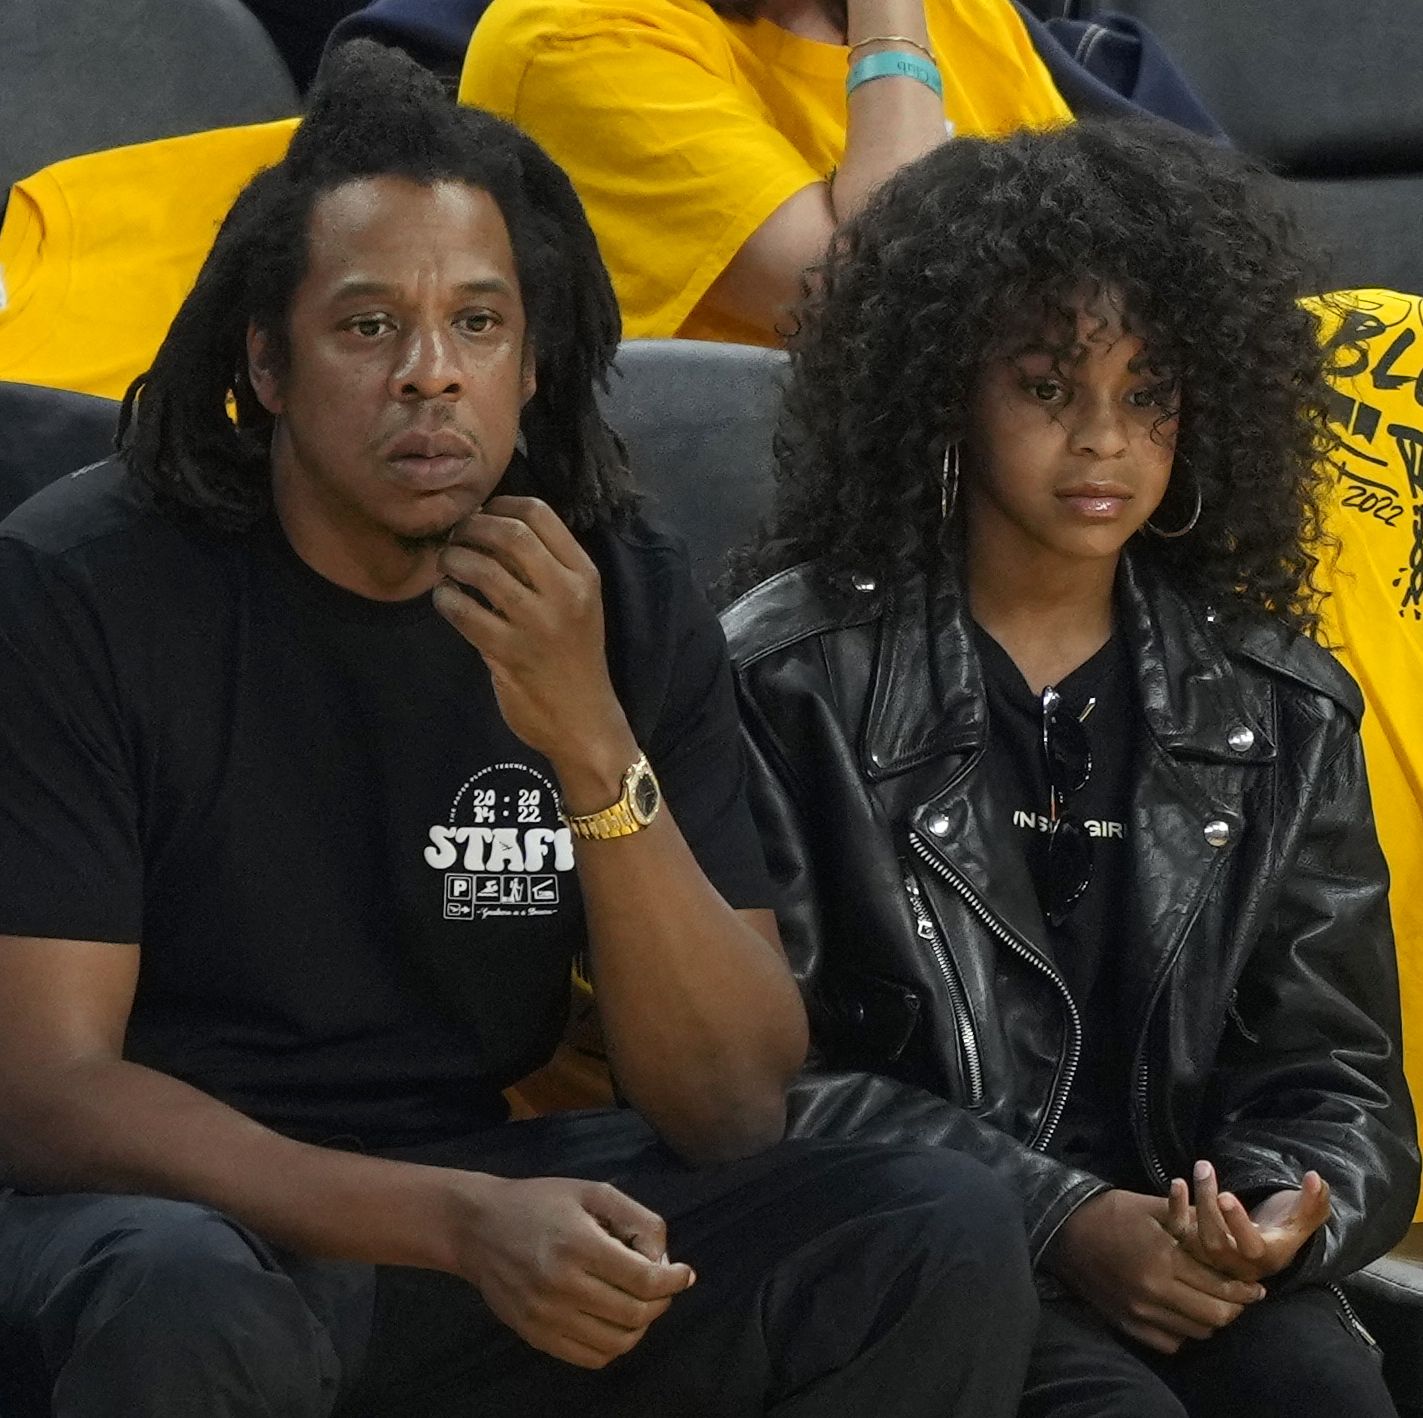 Blue Ivy Carter Looked Identical to Her Mom During a Daddy-Daughter Date with Jay-Z Last Night